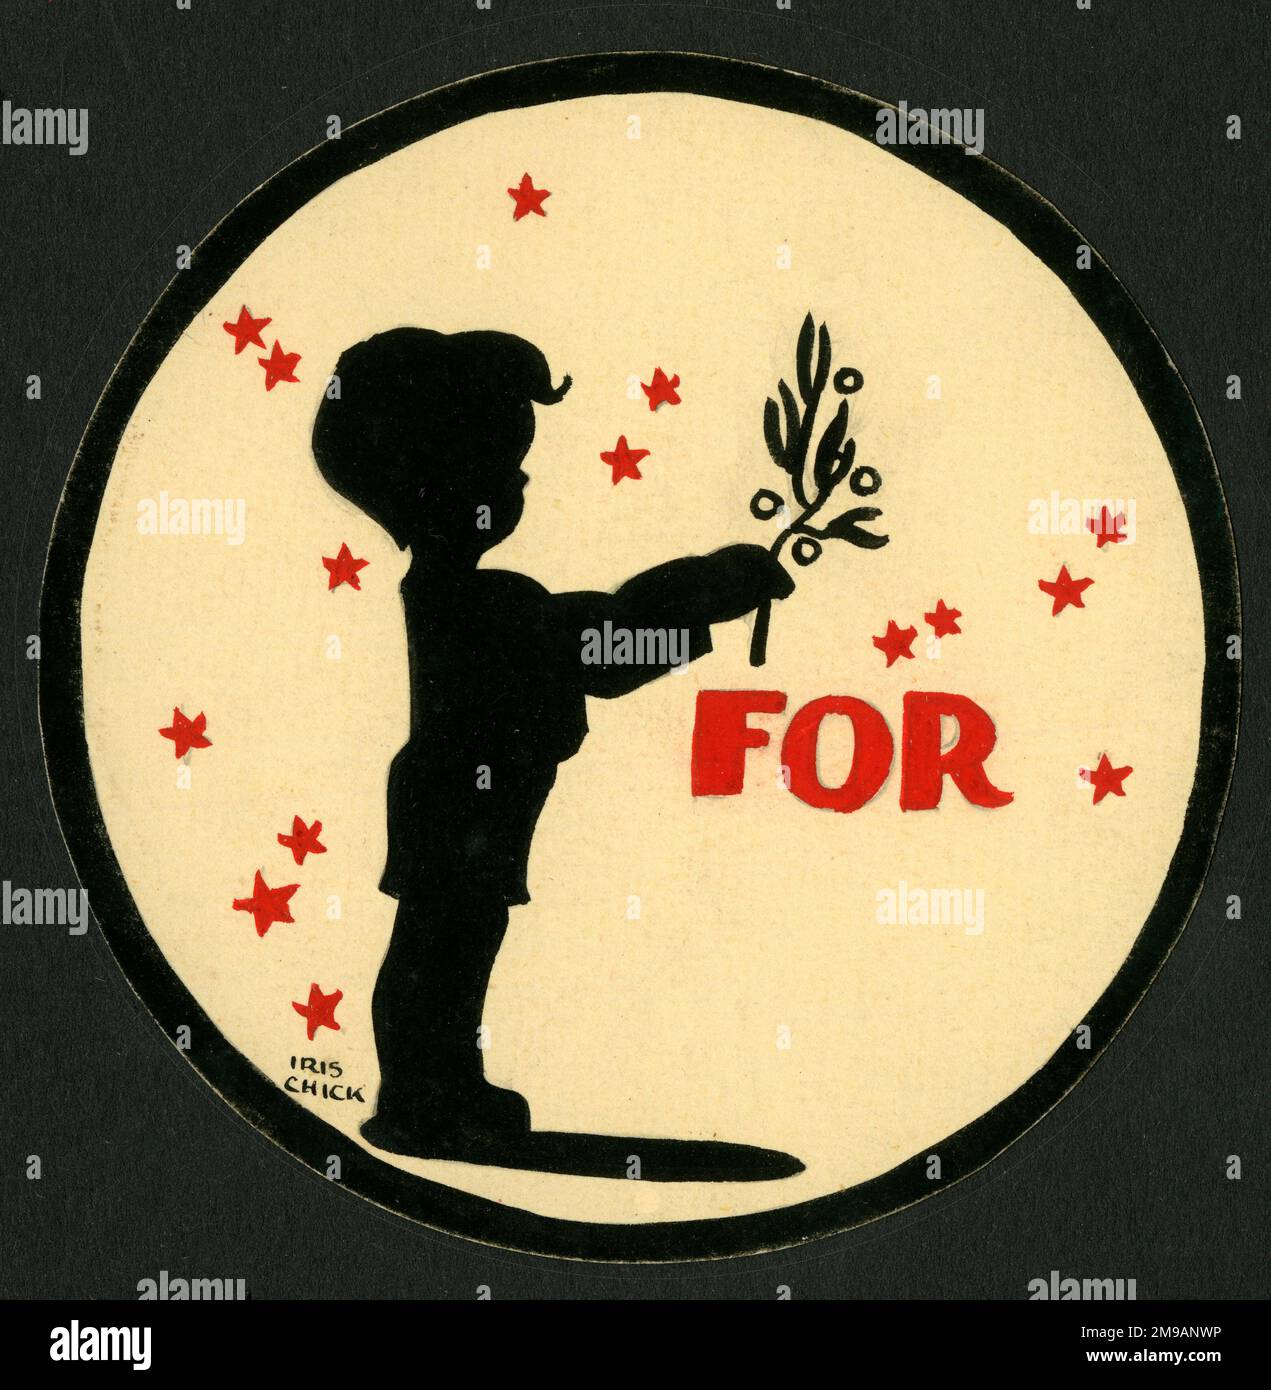 Original Artwork - Design for a circular place marker, showing a young boy holding up a sprig of Christmas mistletoe against a star-filled background. Stock Photo